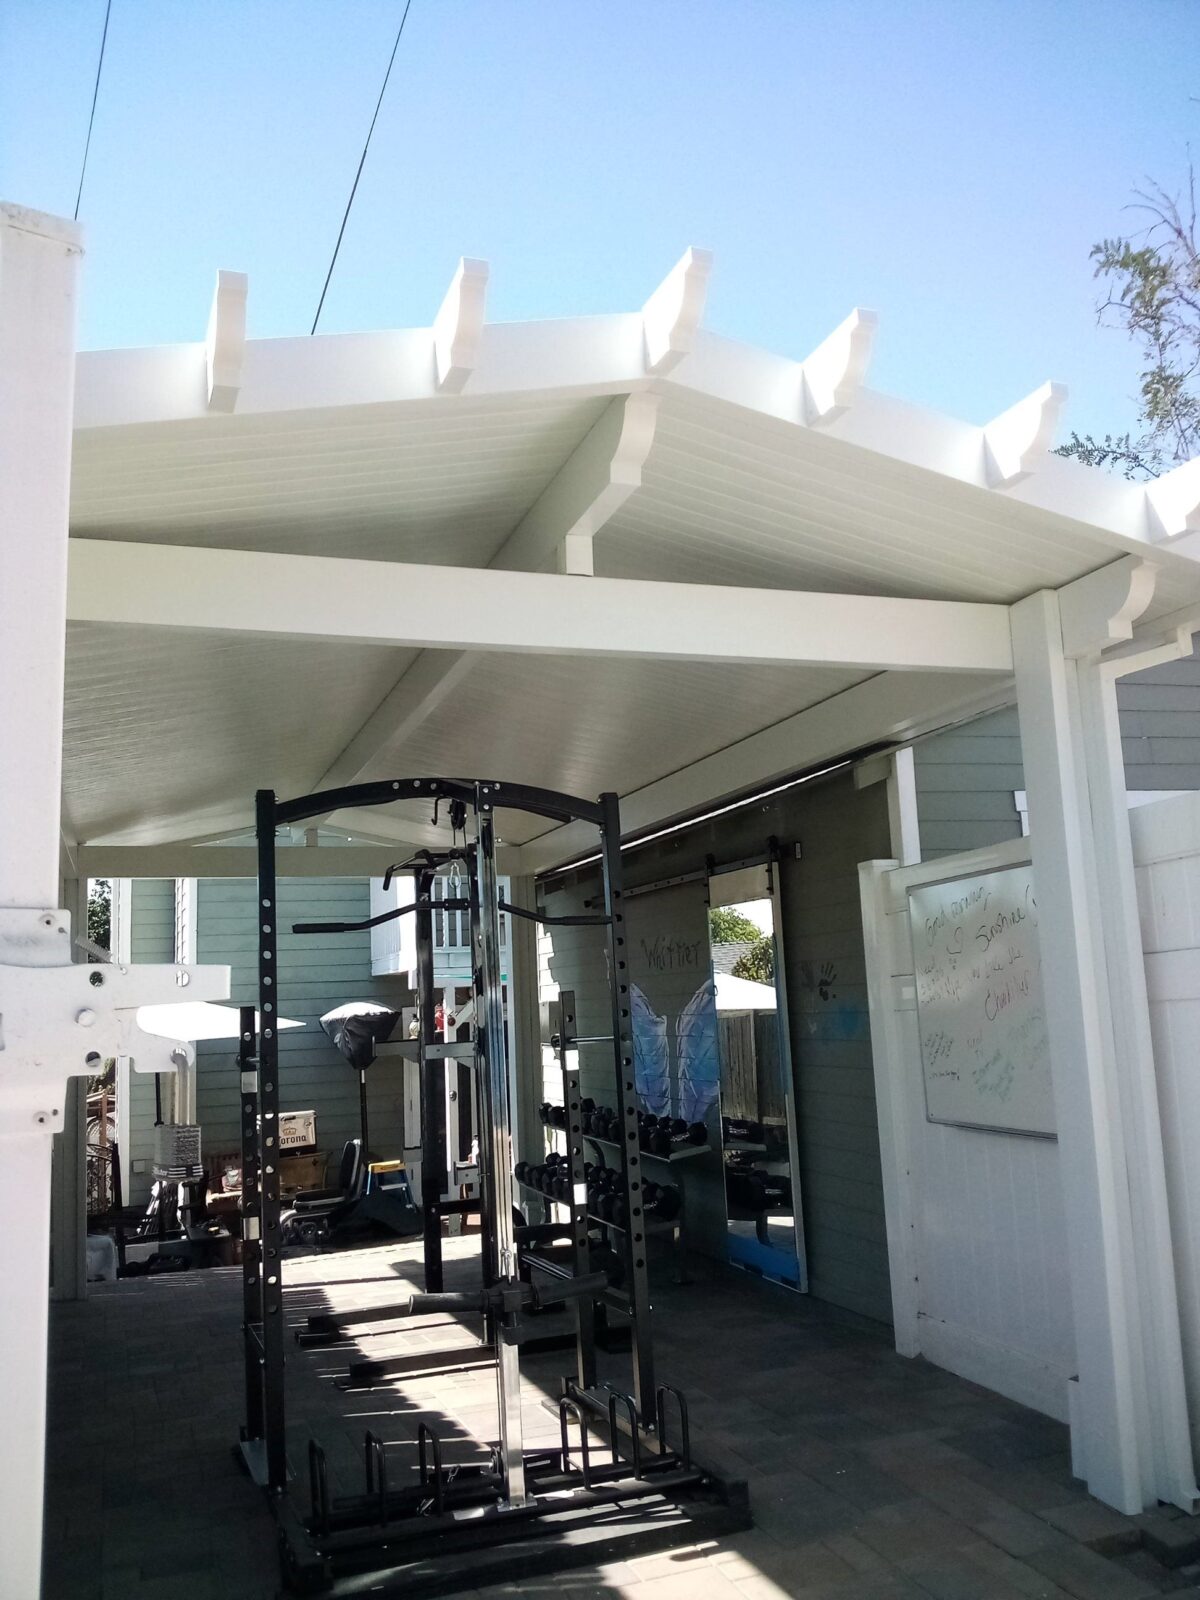 Reasons to Select a Customized Patio Cover